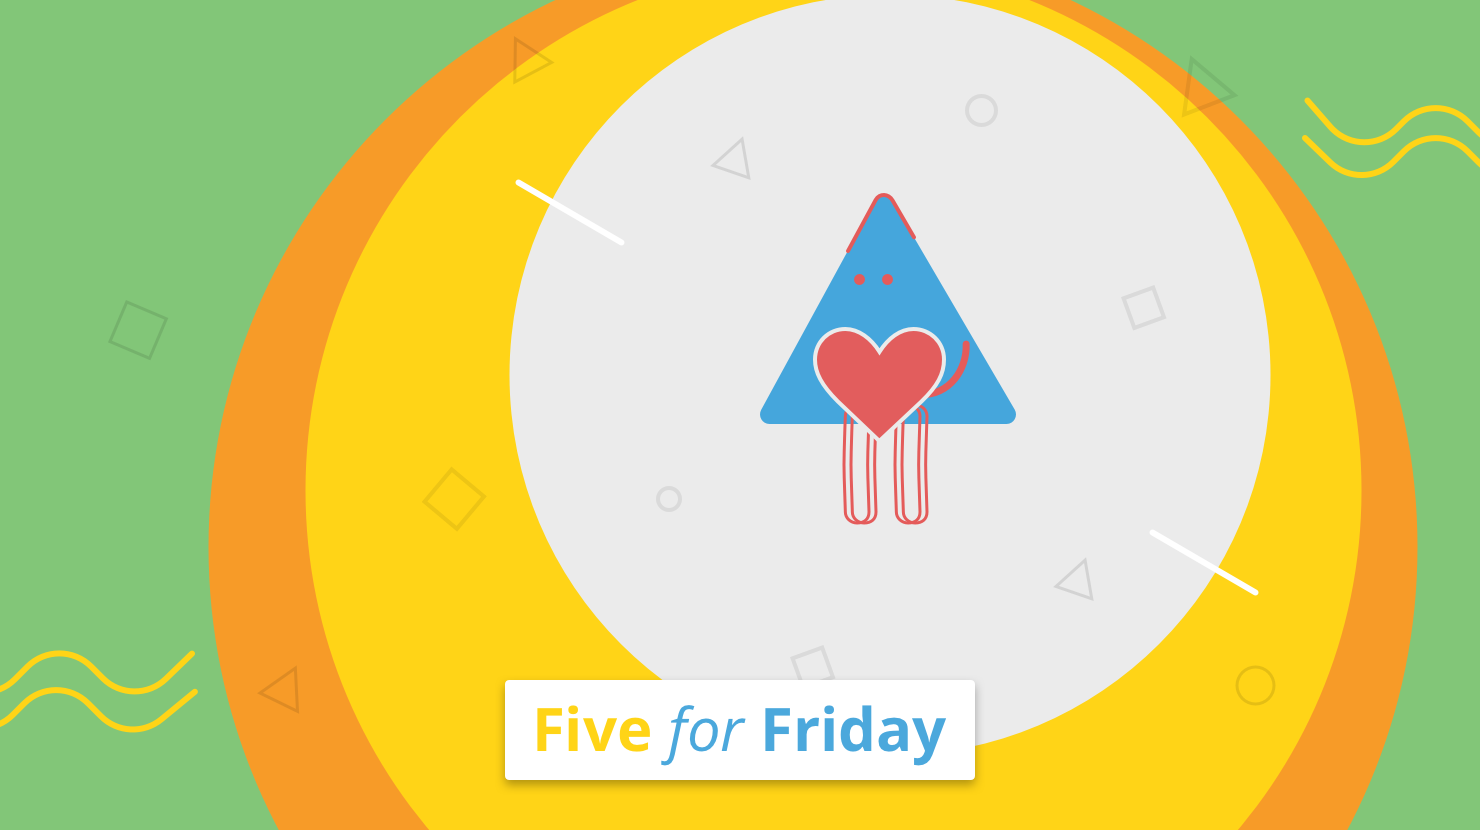 Five for Friday: How to love 1-on-1 meetings